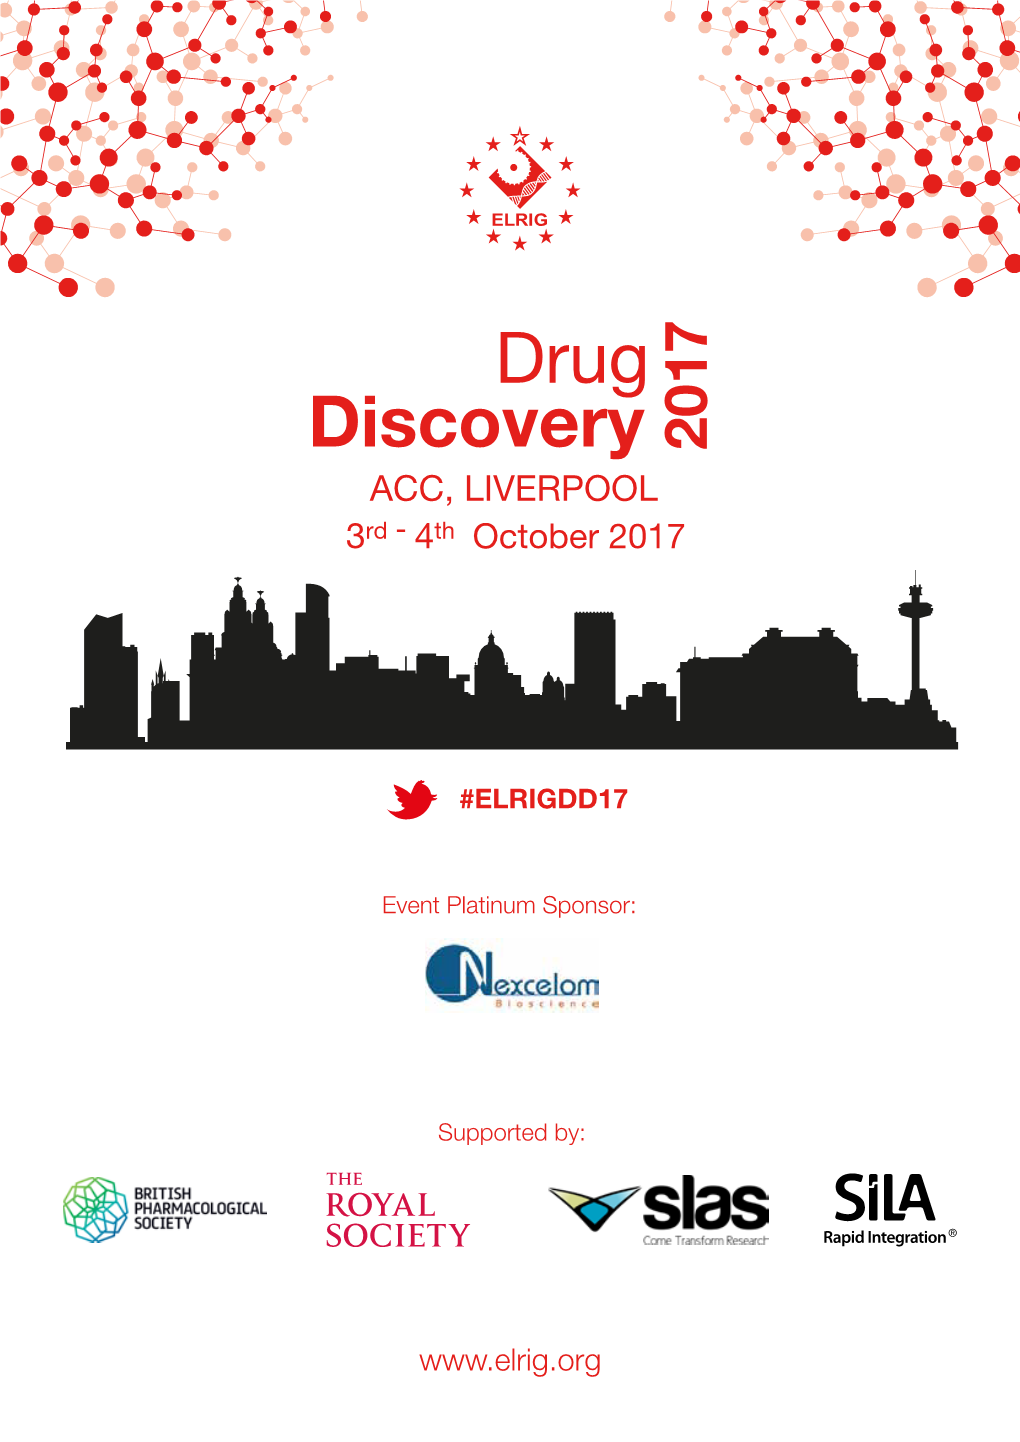 Drug Discovery 2017